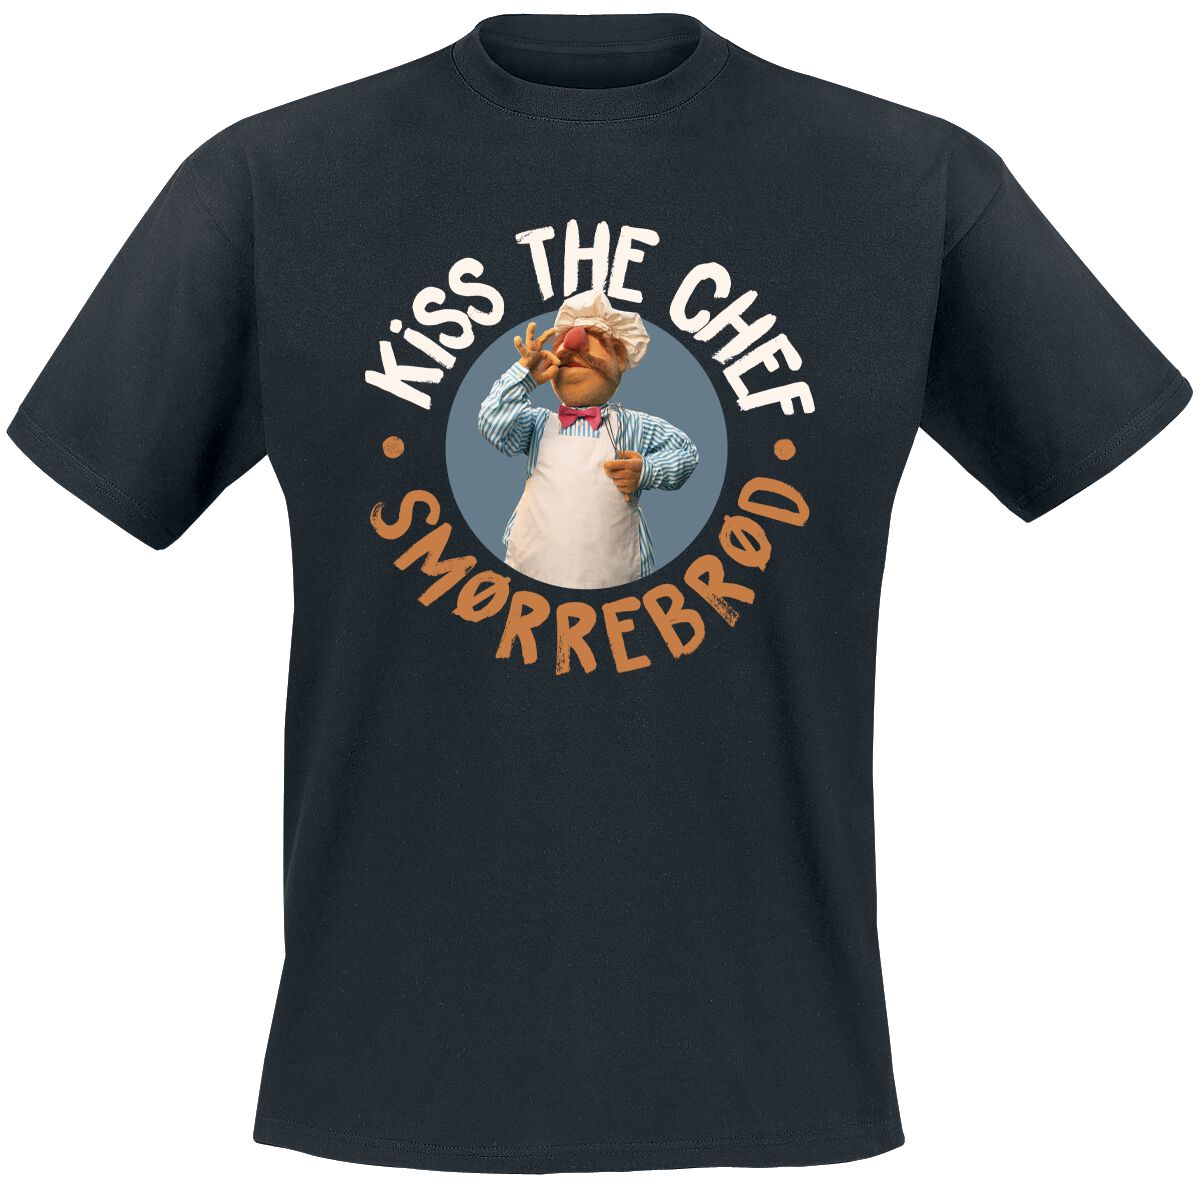 Die Muppets Kiss The Chef - Smorrebrod T-Shirt schwarz in 4XL